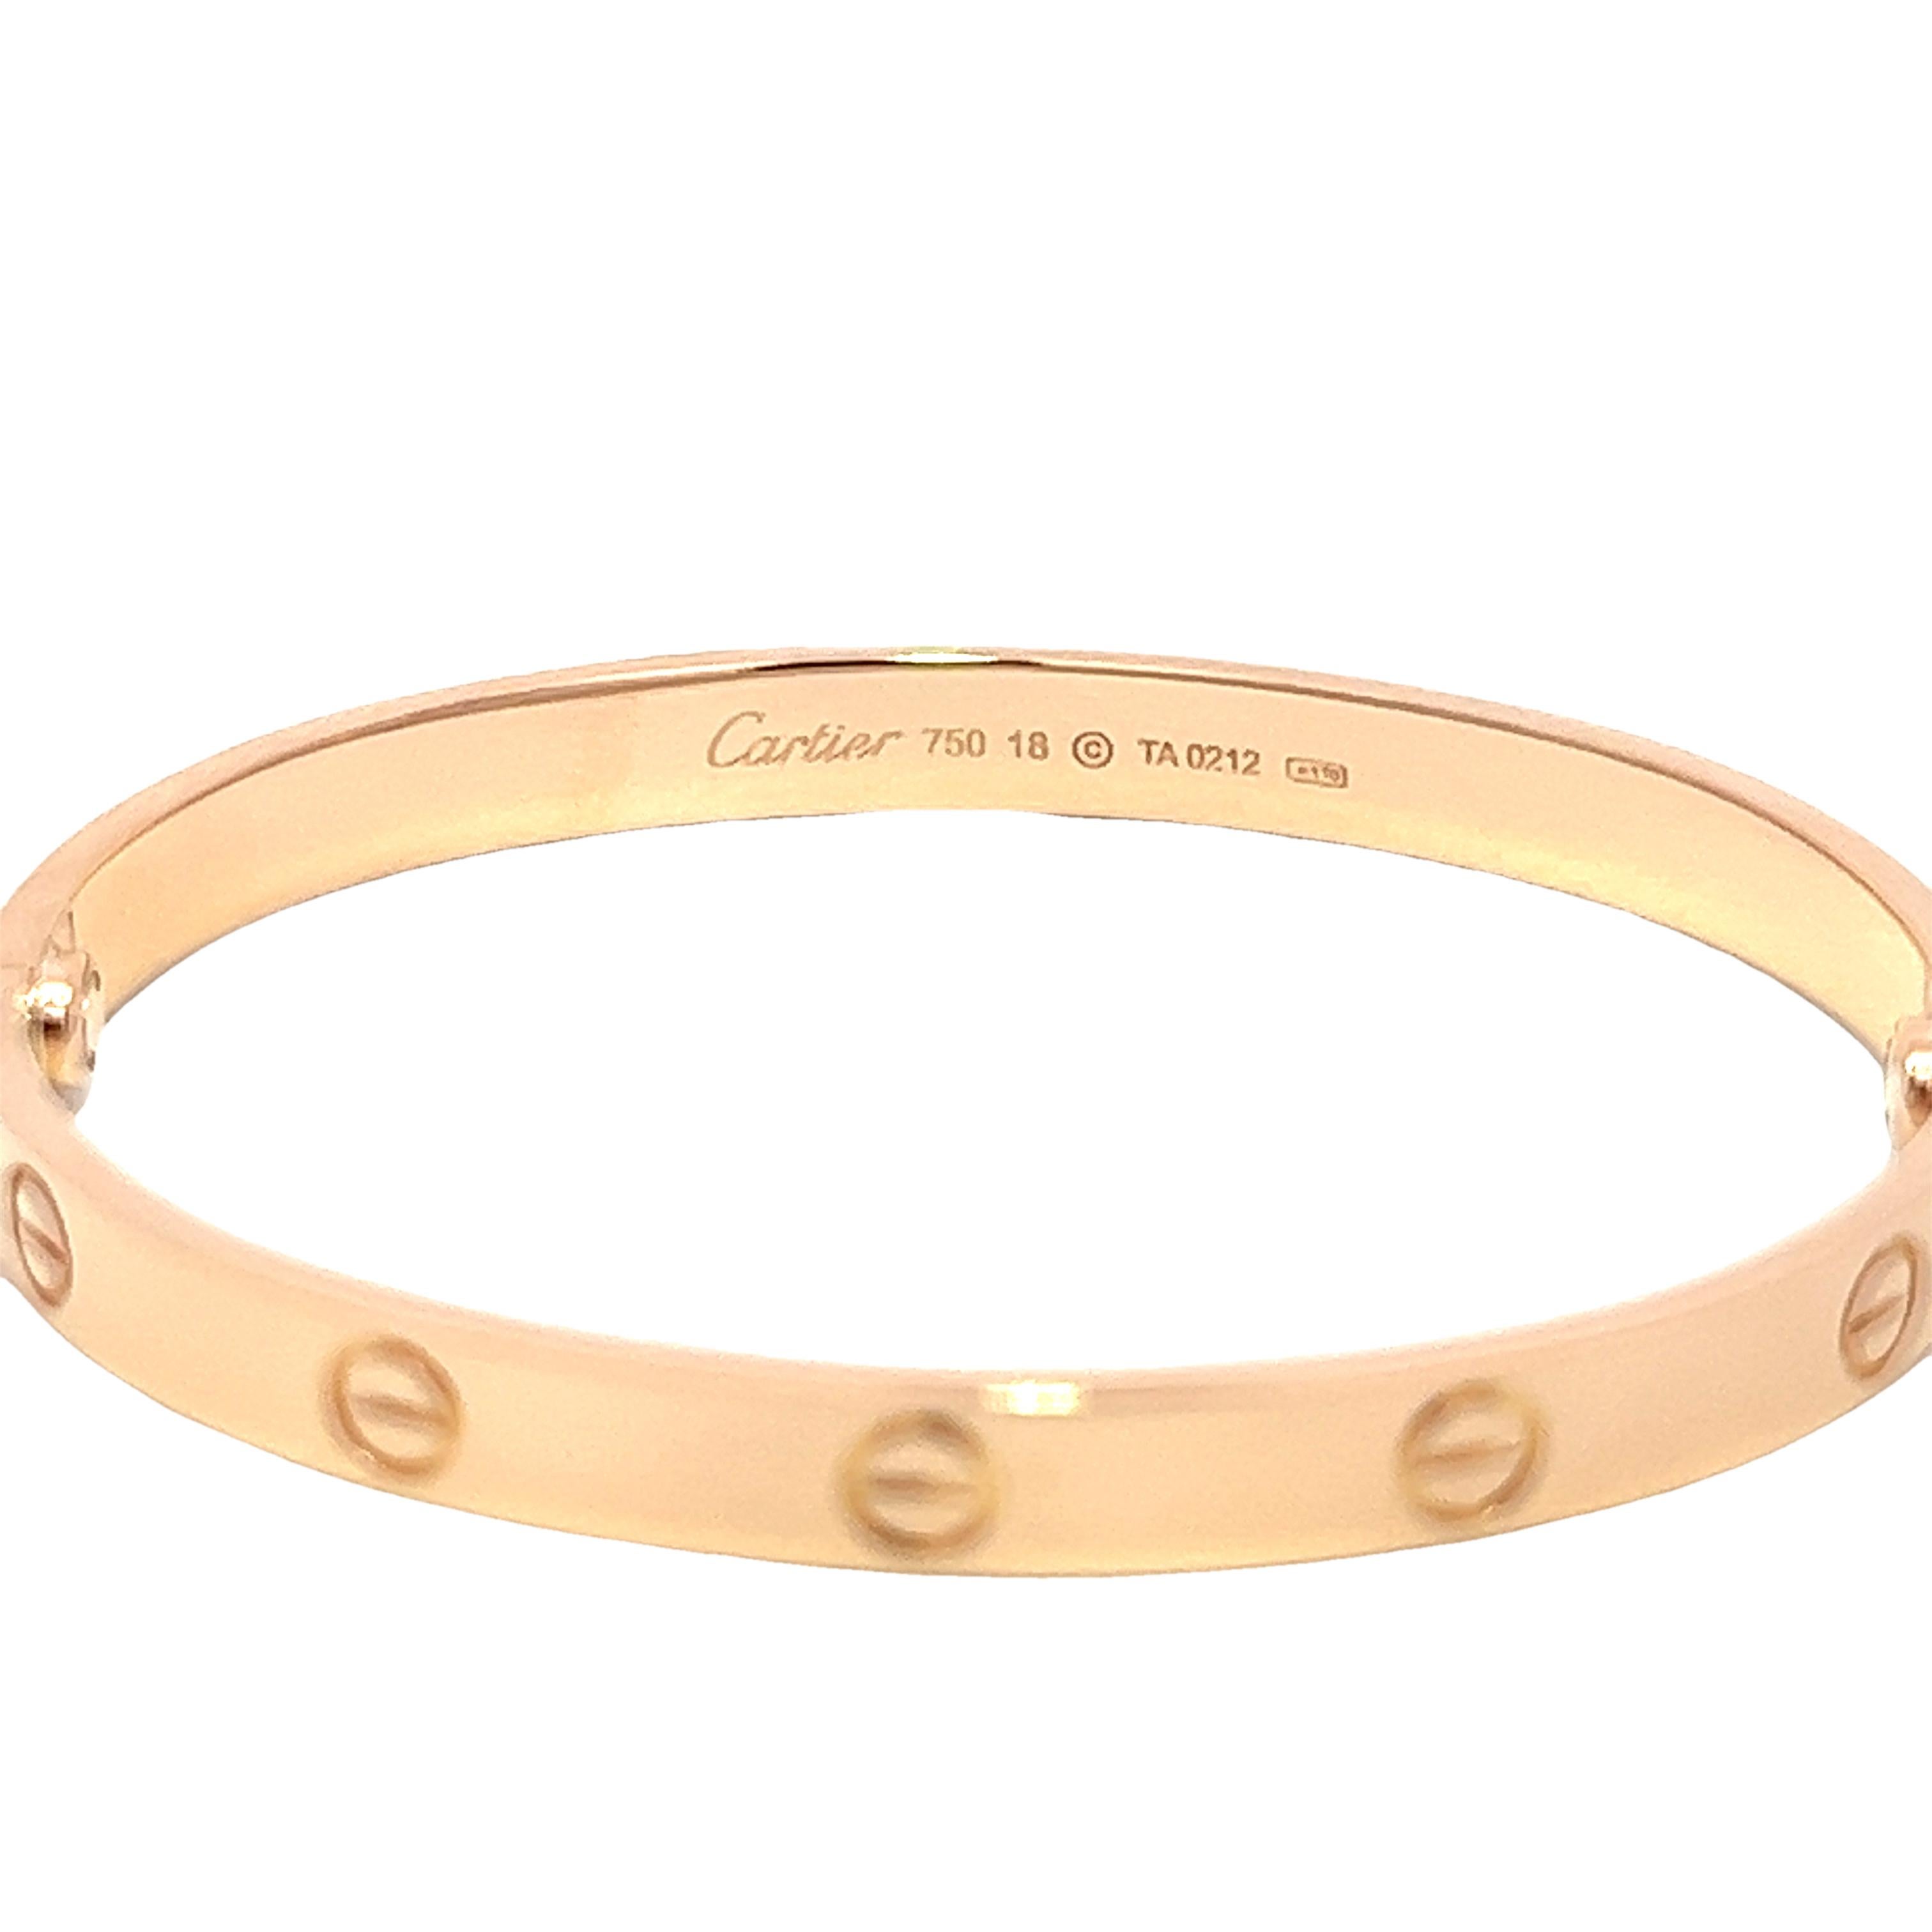 Original LOVE bracelet, 18K rose gold (750/1000). Comes with a screwdriver. The LOVE bracelet is an icon of jewelry design: a close-fitting, oval bracelet composed of two rigid arcs worn on the wrist and removed using a specific screwdriver. This